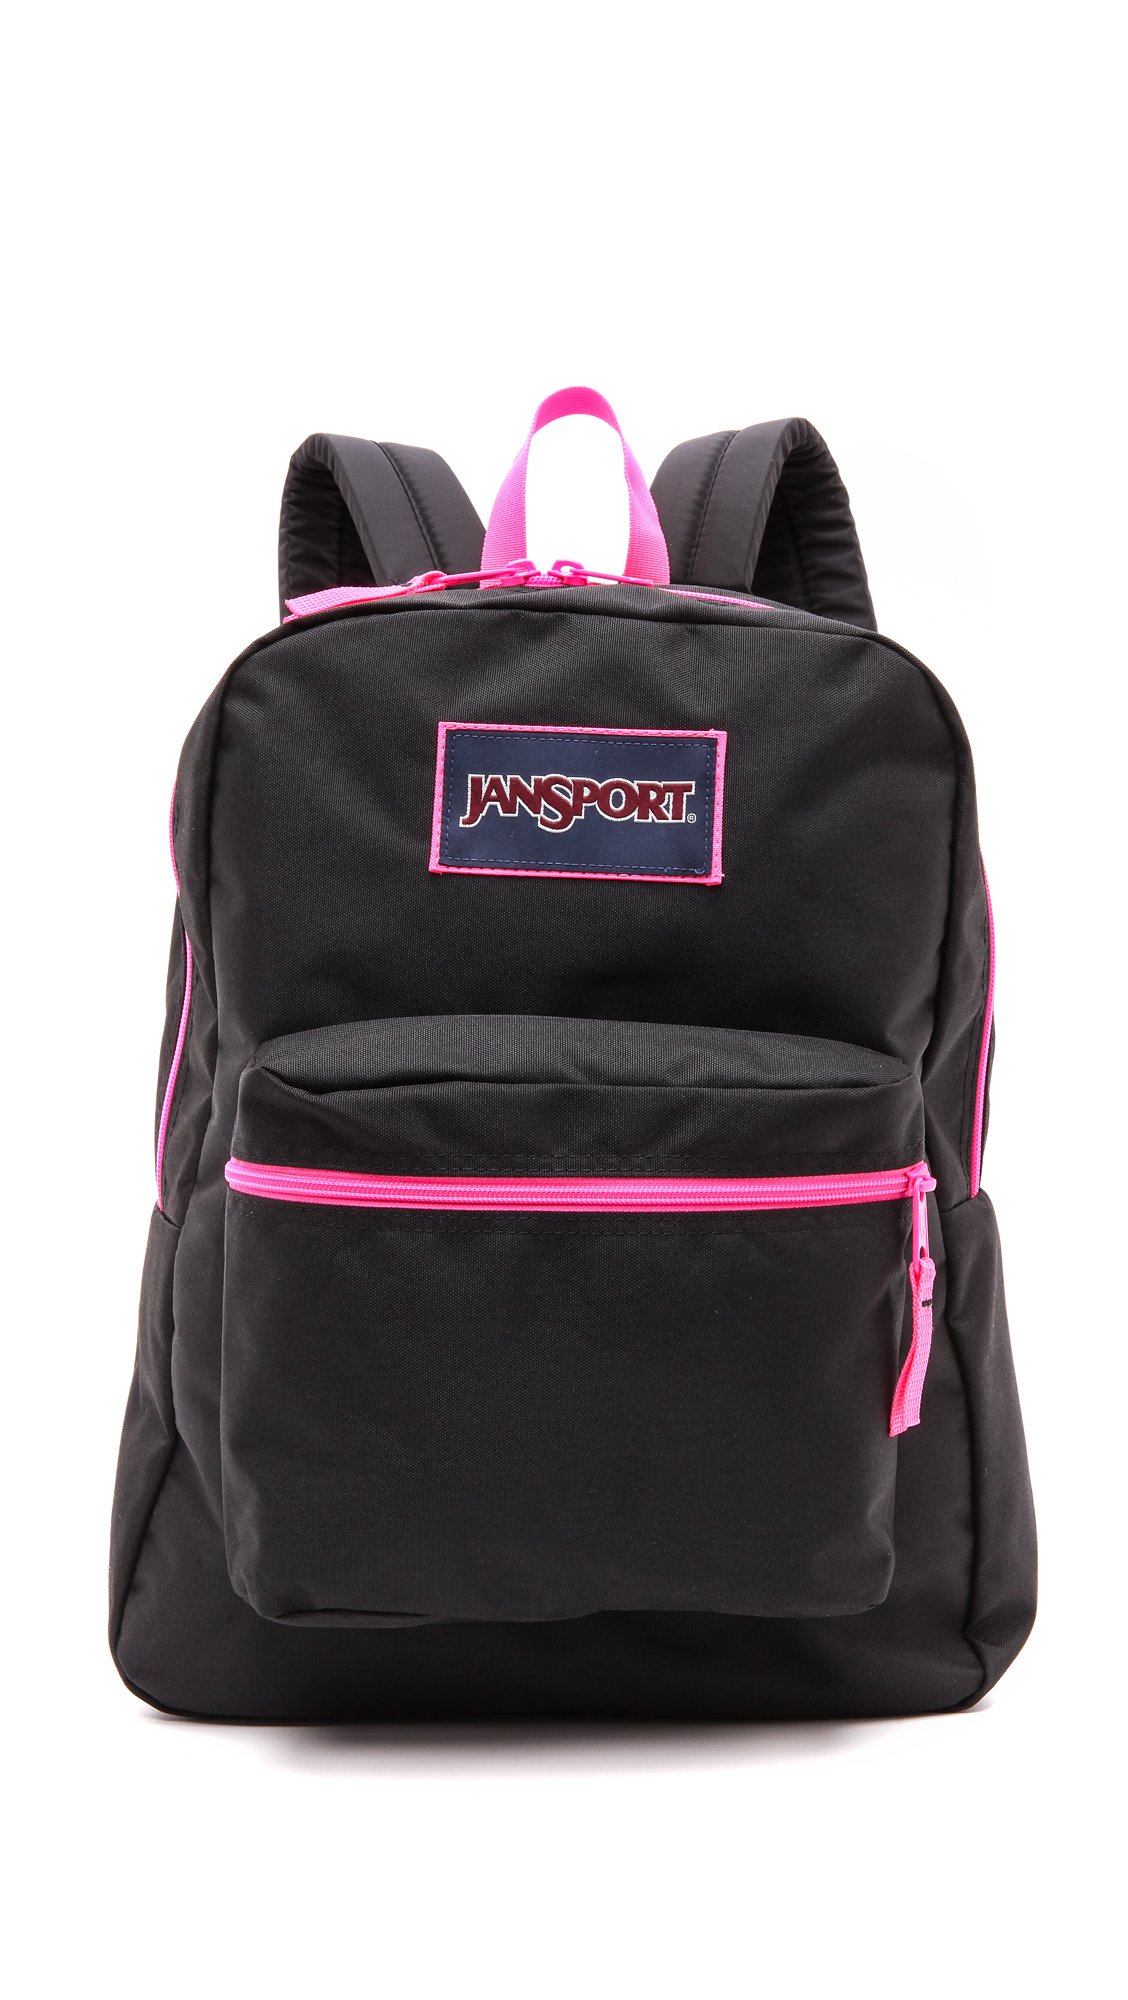 Jansport Classic Overexposed Backpack - Black And Fluorescent Pink | Lyst